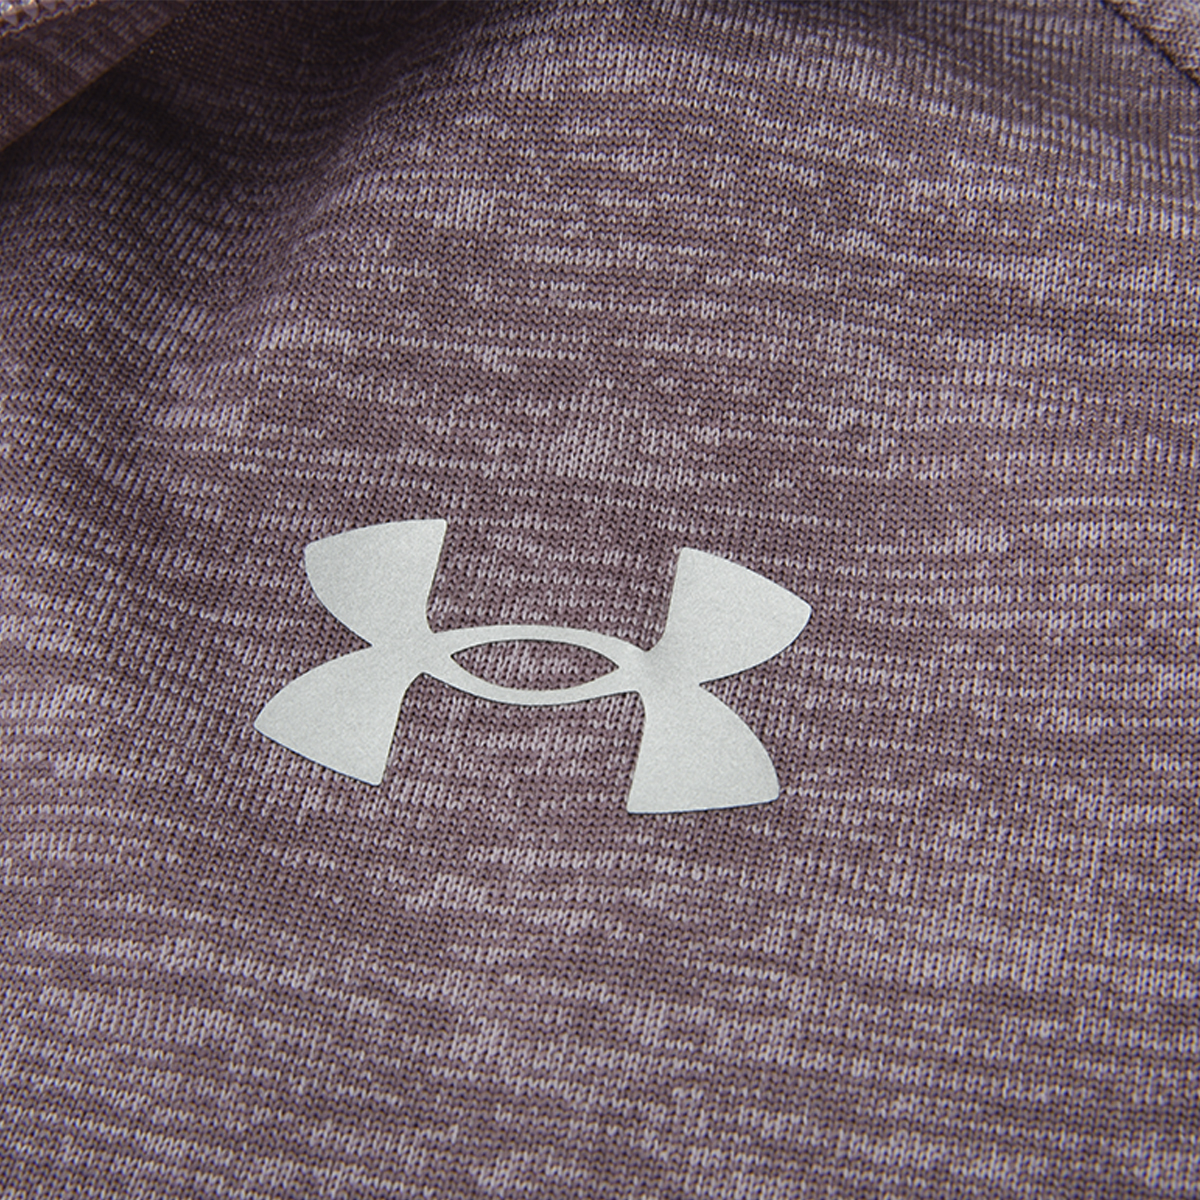 Buzo Under Armour Tech 1/2 Zip Mujer,  image number null